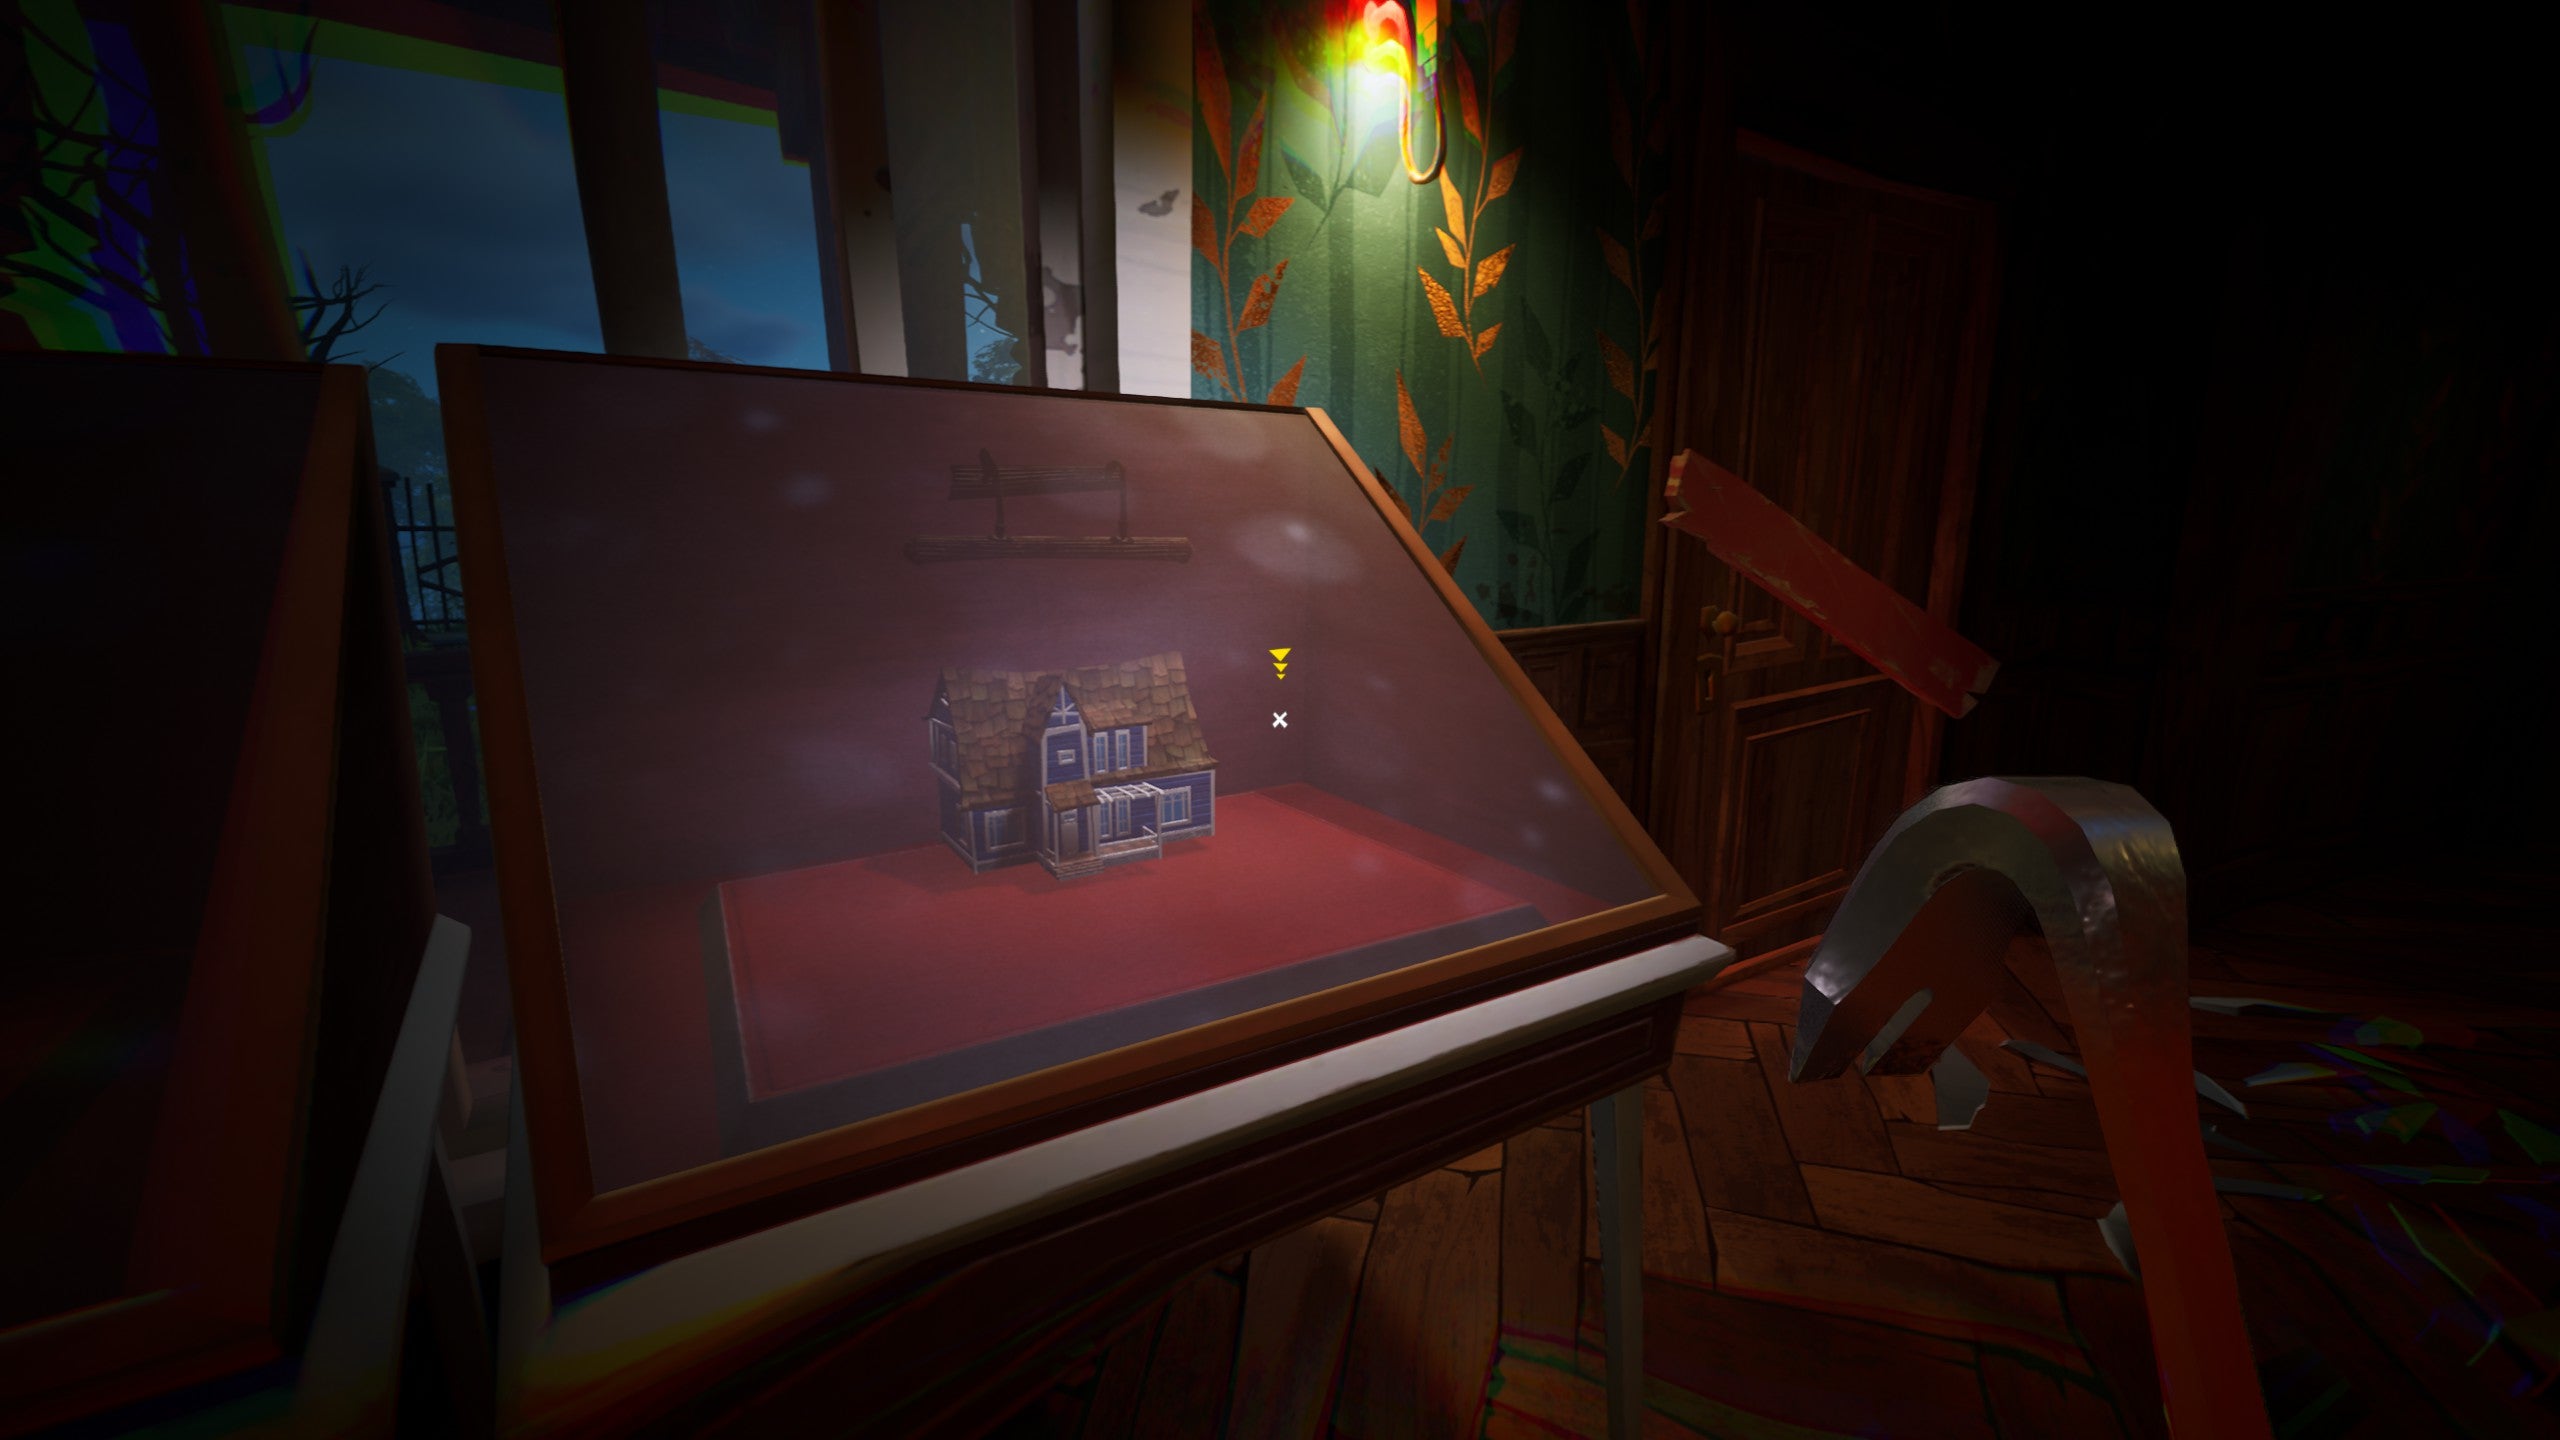 The glass case containing the second model house in Hello Neighbor 2